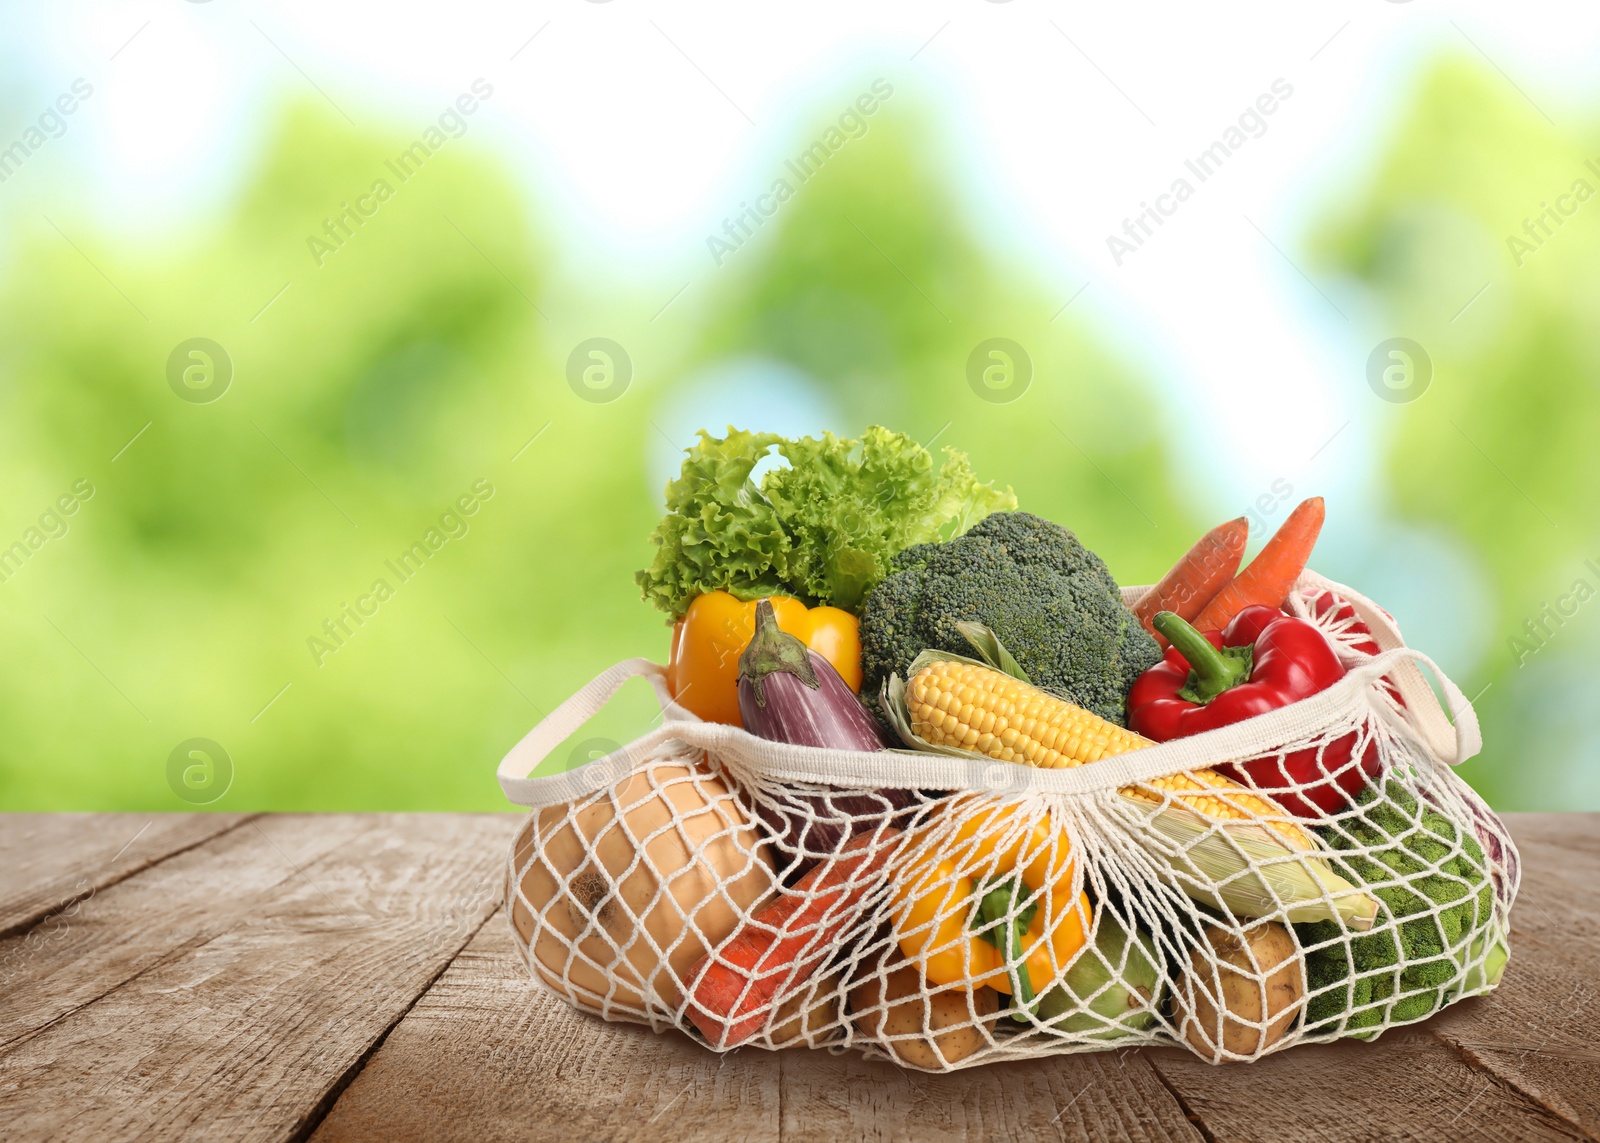 Image of Fresh vegetables in mesh bag on wooden table against blurred background